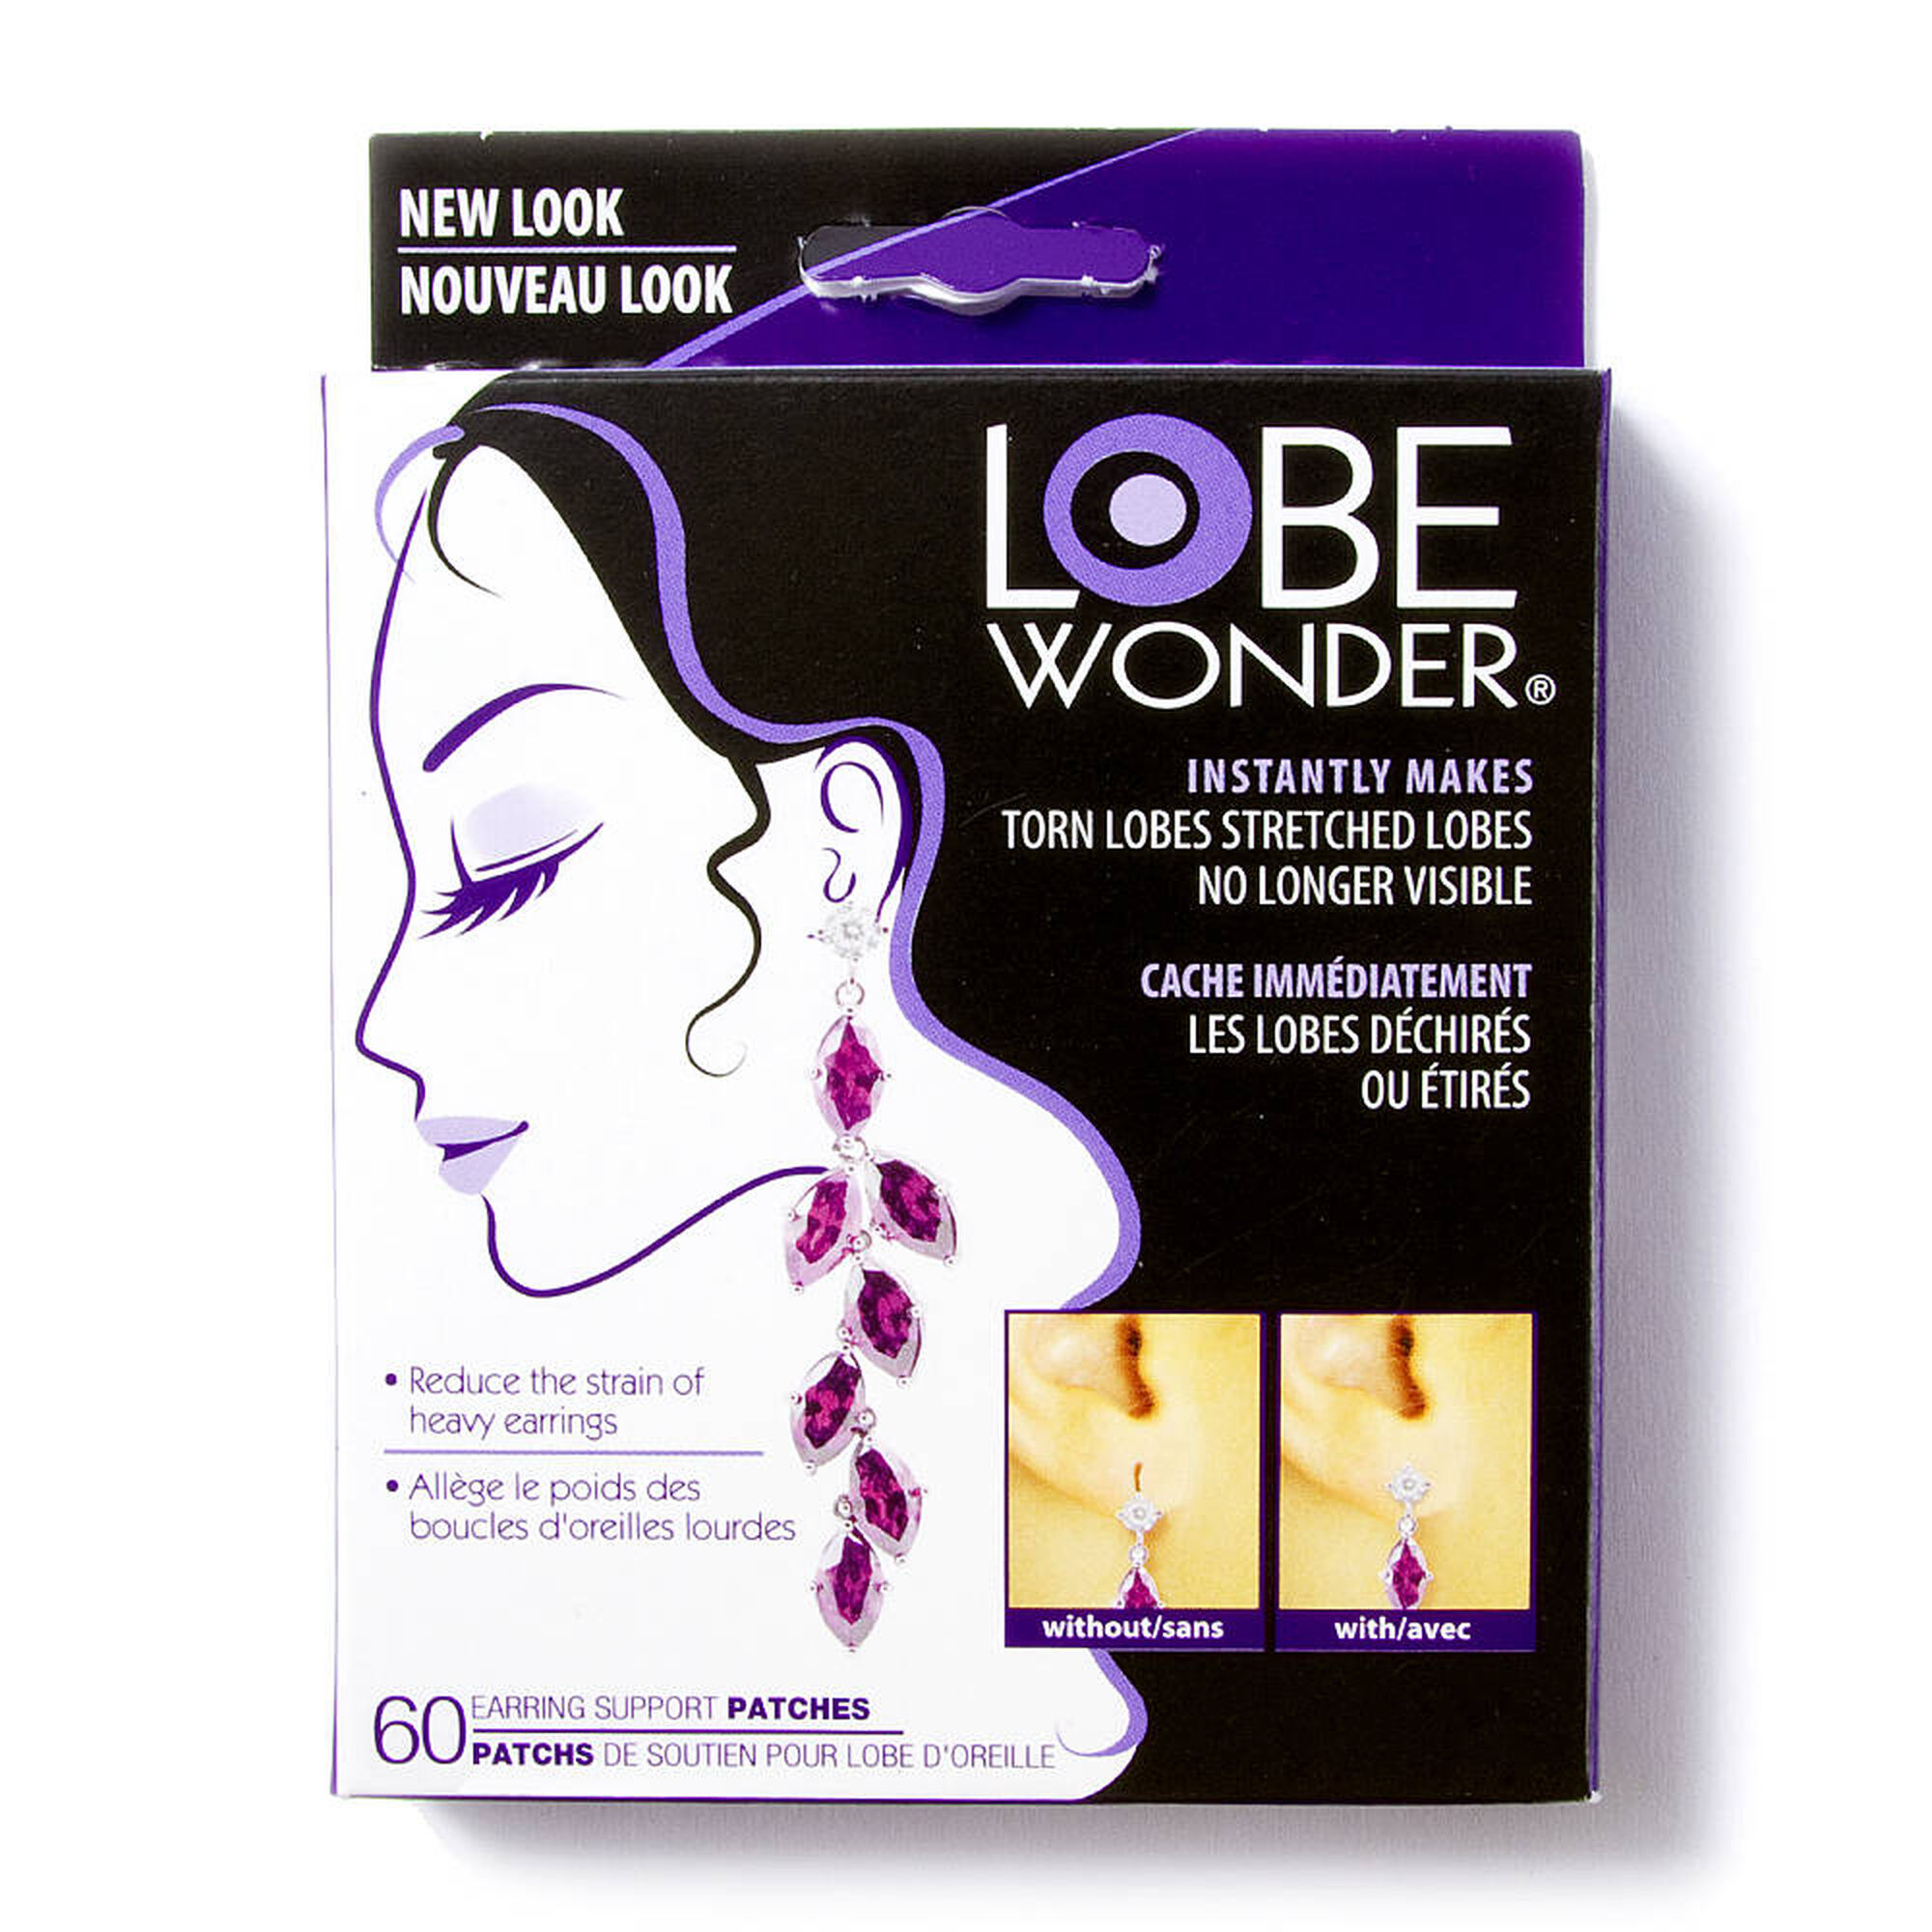 This is a perfect example of how the amazing Lobe Wonder patches